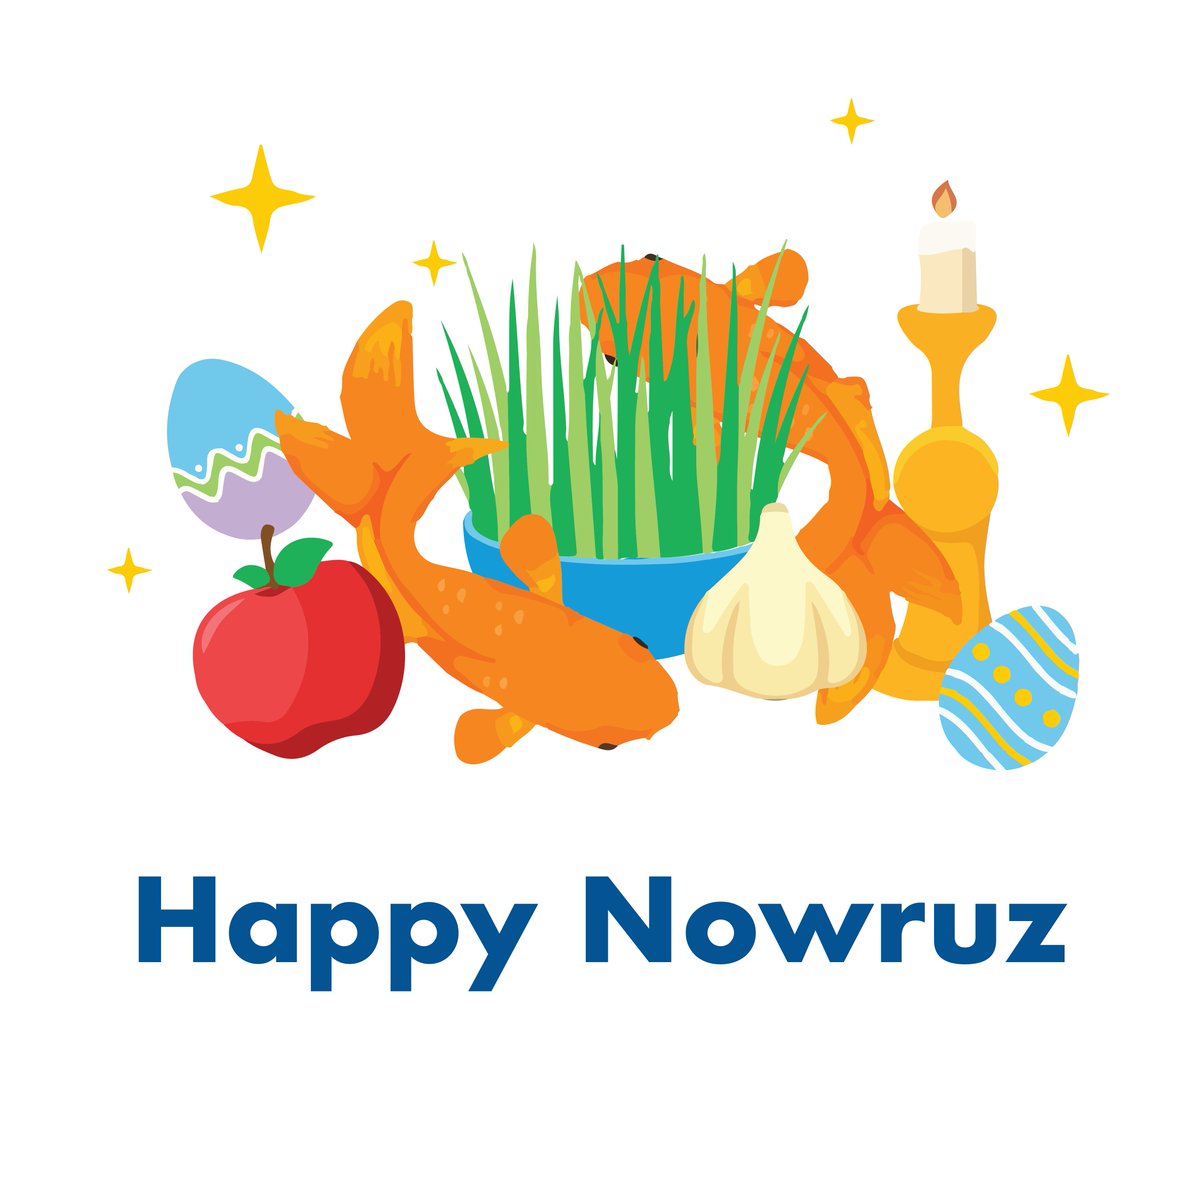 Happy Nowruz to our community! As we welcome the spring season, let’s come together to celebrate new beginnings and the rich tapestry of cultures in our GBC family. #Nowruz #Community #NewBeginnings #College